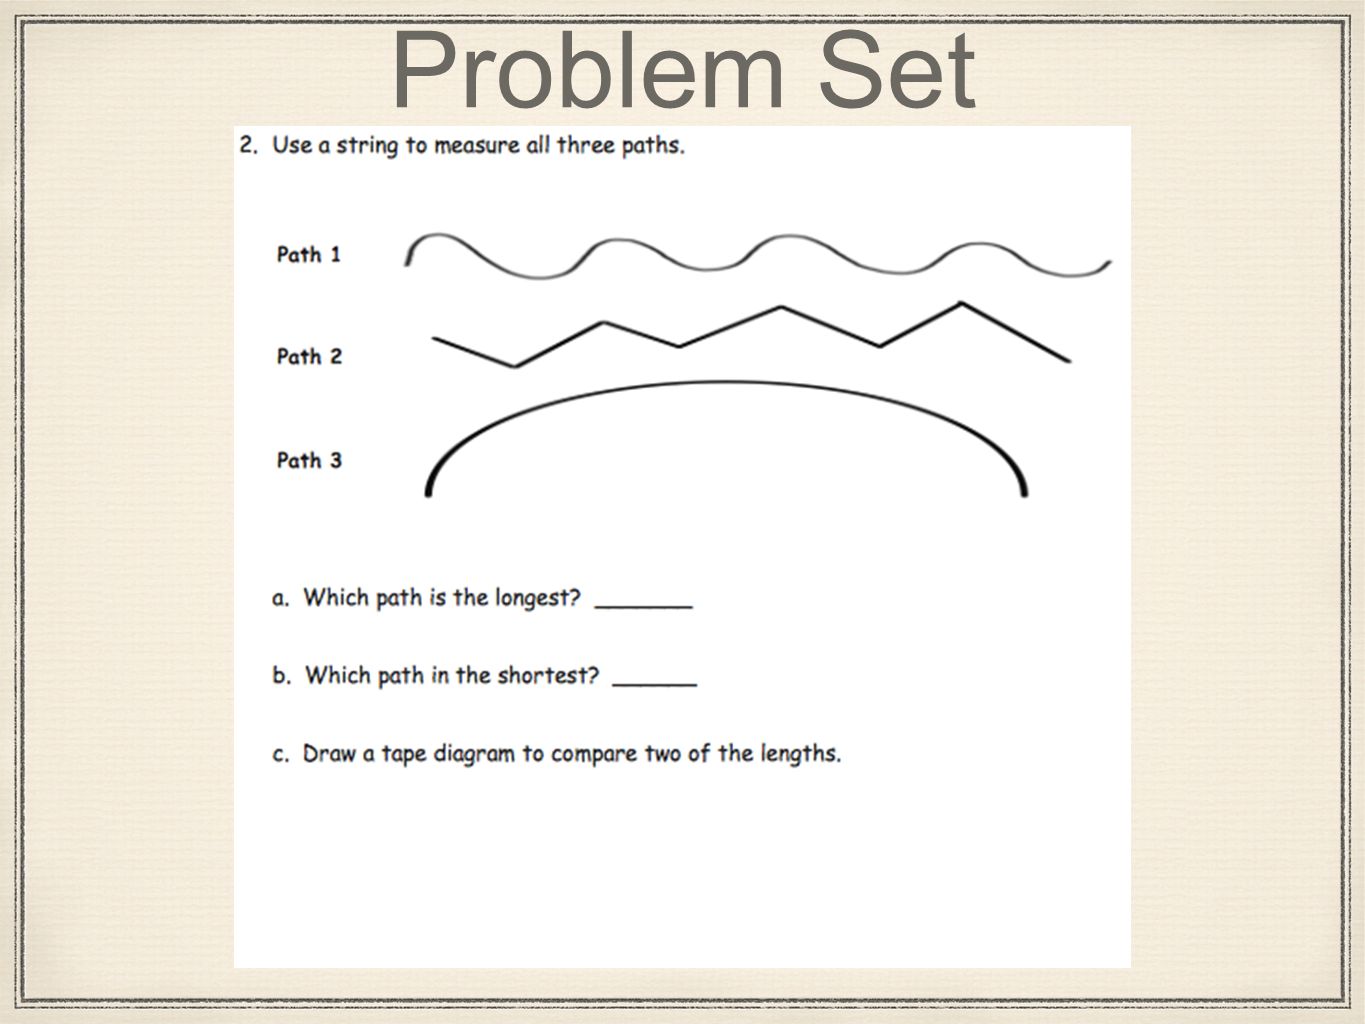 Module 2 Lesson 9 Measure Lengths Of String Using Measurement Tools And Use Tape Diagrams To Represent And Compare Lengths Lesson 9 Measure Lengths Ppt Download